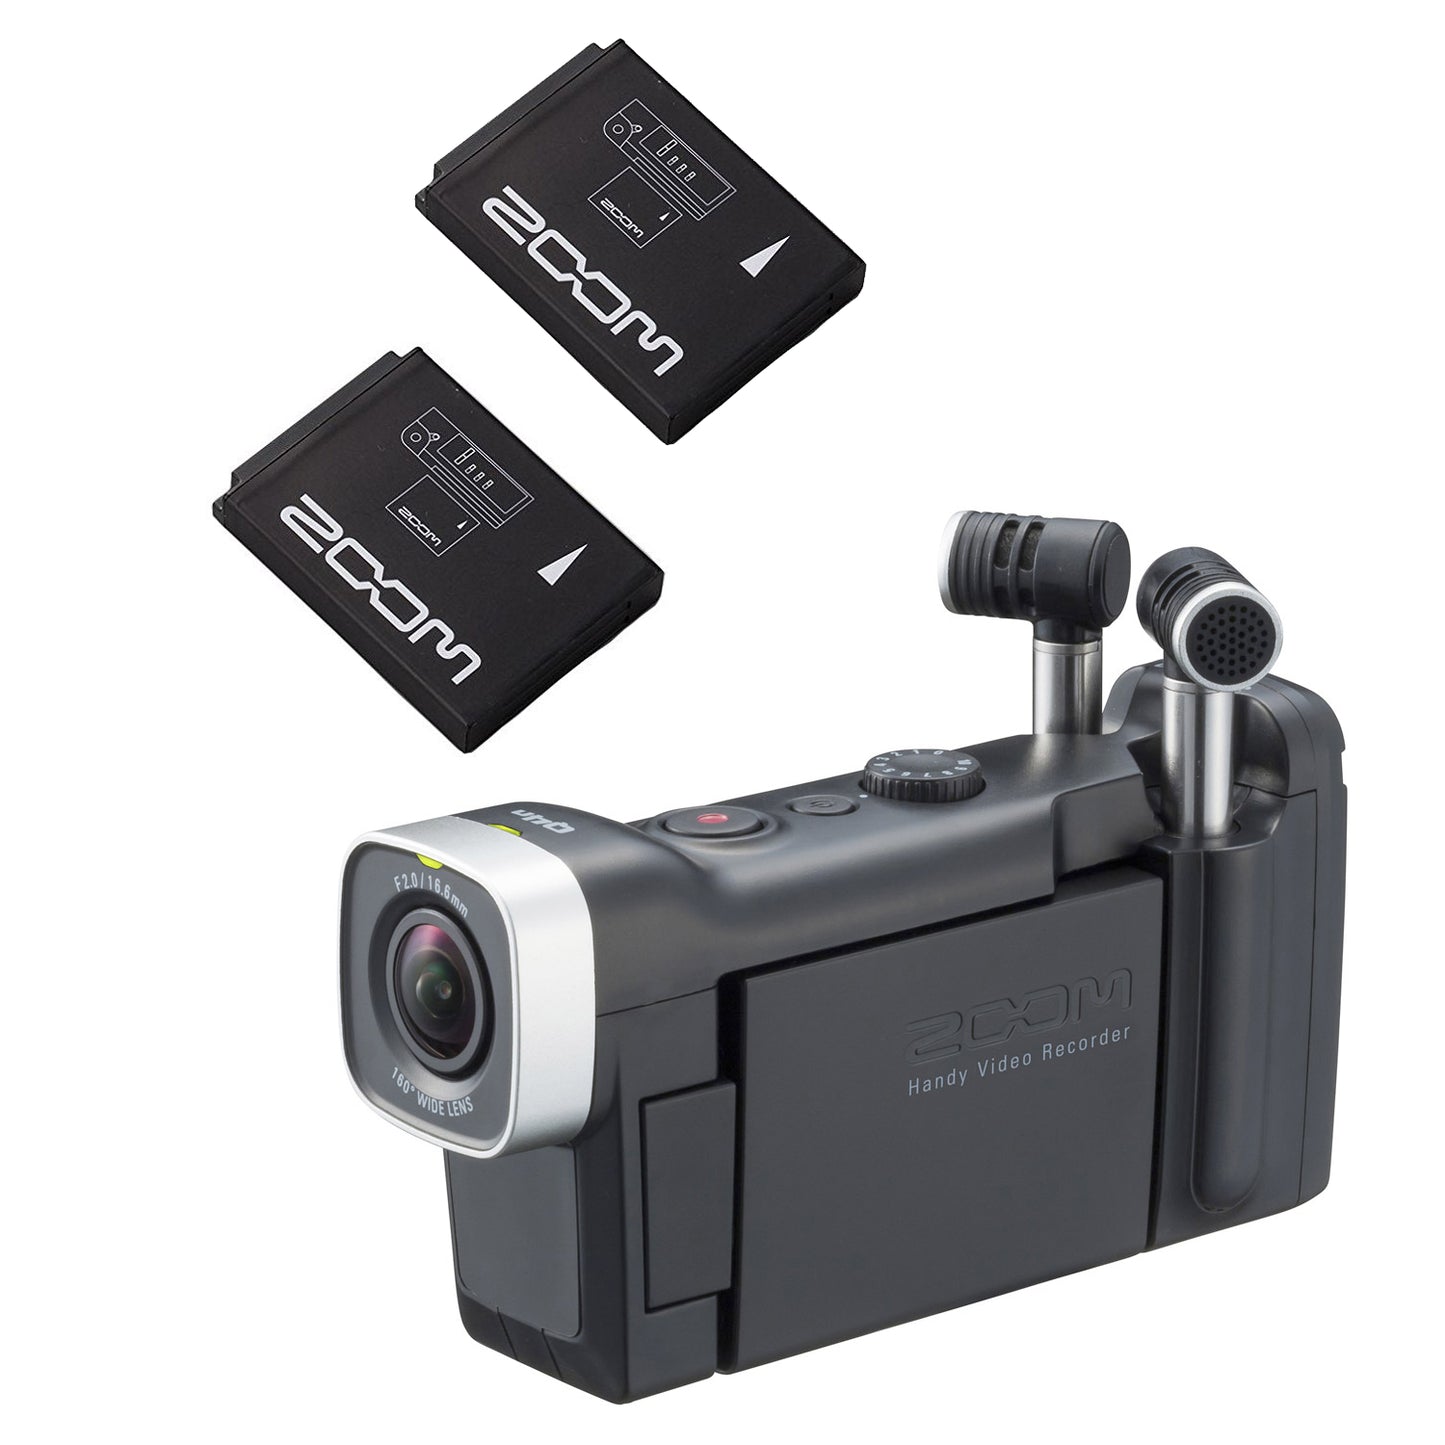 Zoom Q4 Portable HD Video and Audio Recorder - Reco Music Malaysia